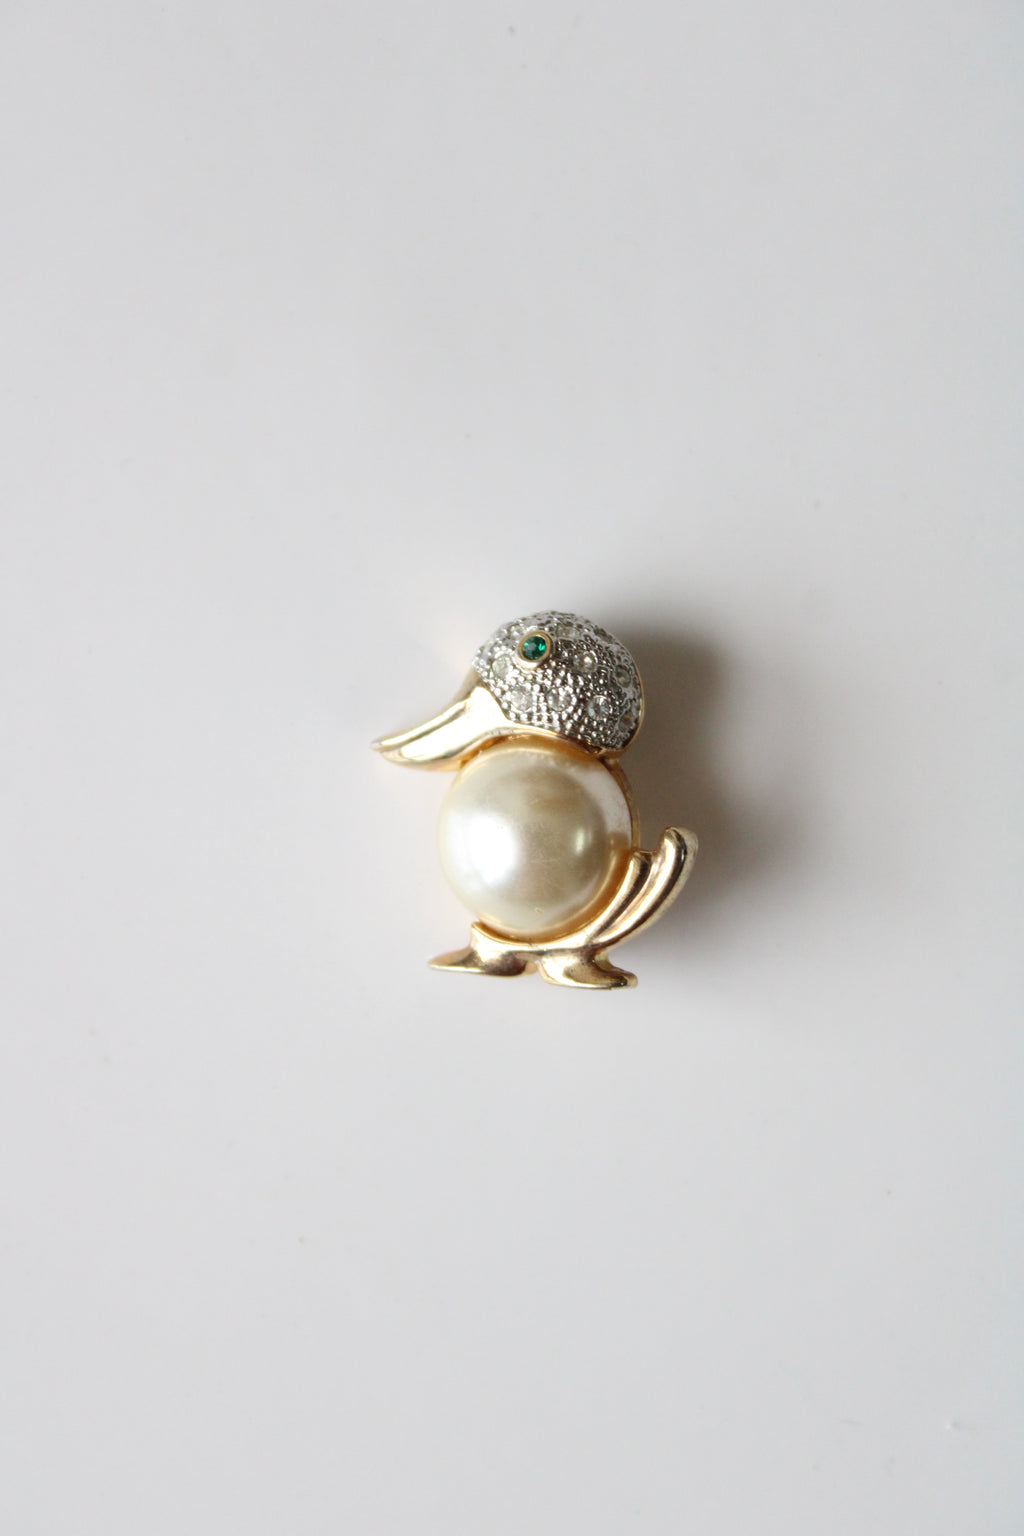 Vintage Gold Green Eyed Faux Pearl Duck Pin